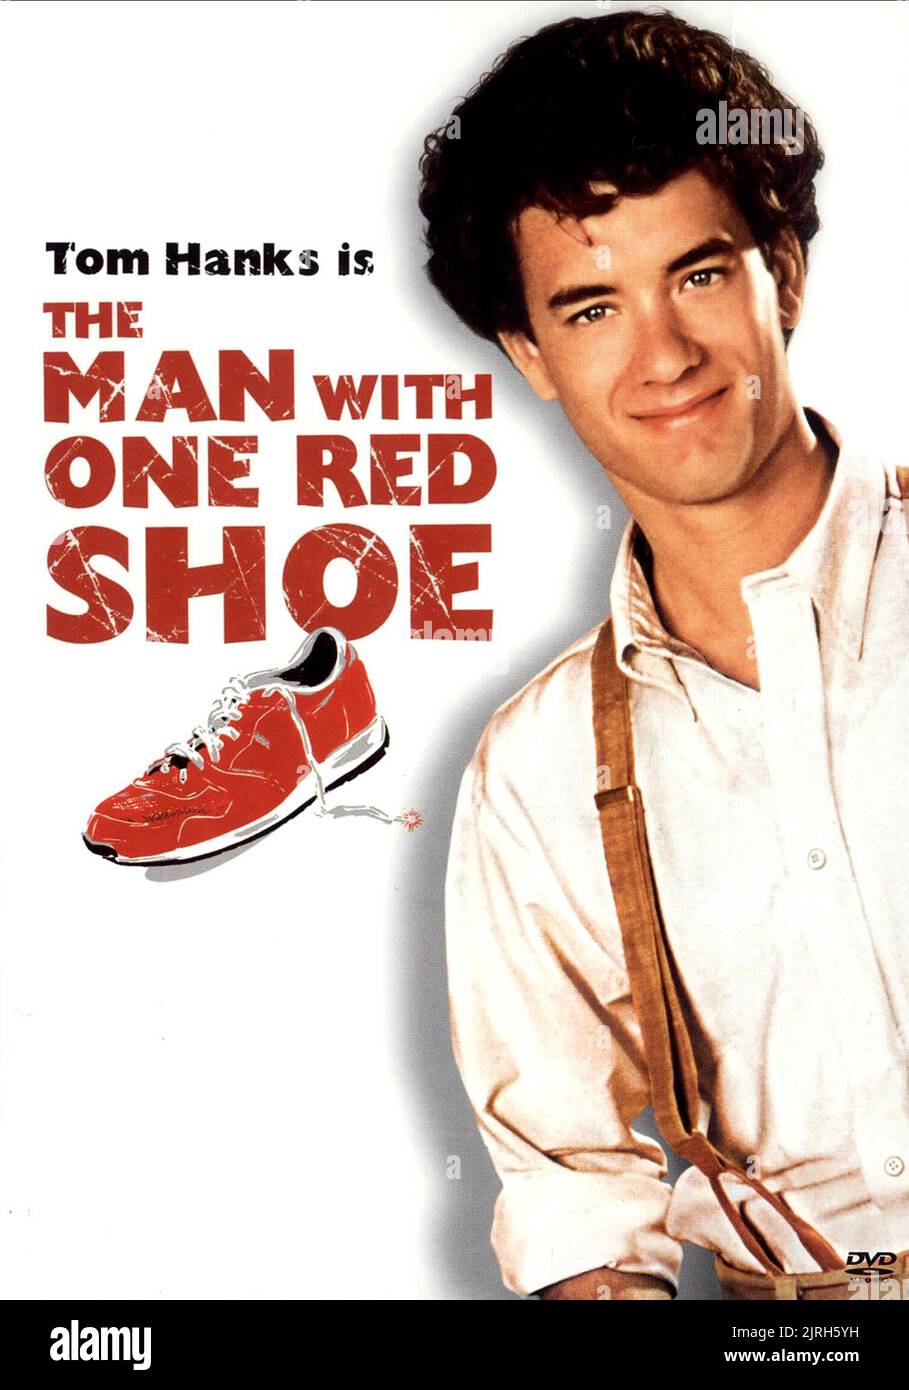 TOM HANKS POSTER, THE MAN WITH ONE RED SHOE, 1985 Stock Photo